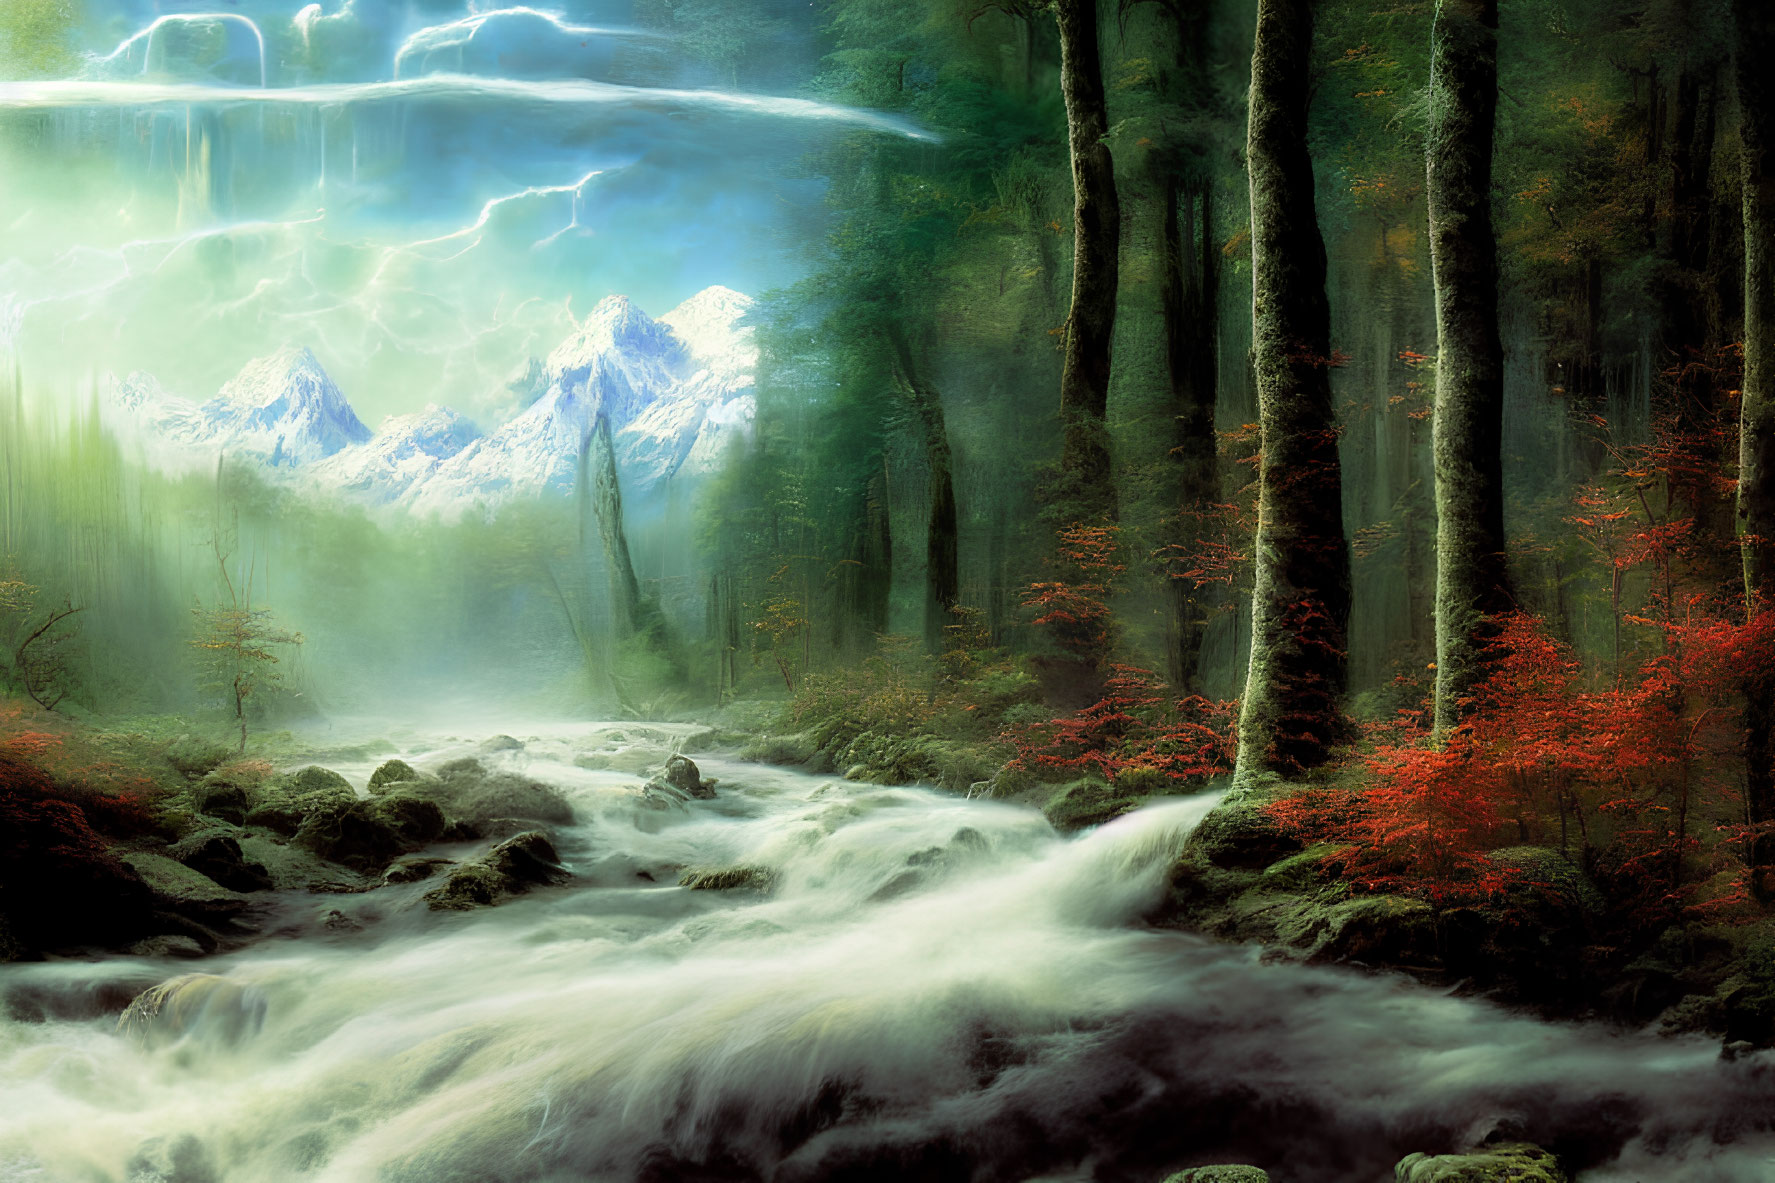 Mystical forest with rushing river, red trees, snowy mountains, stormy sky